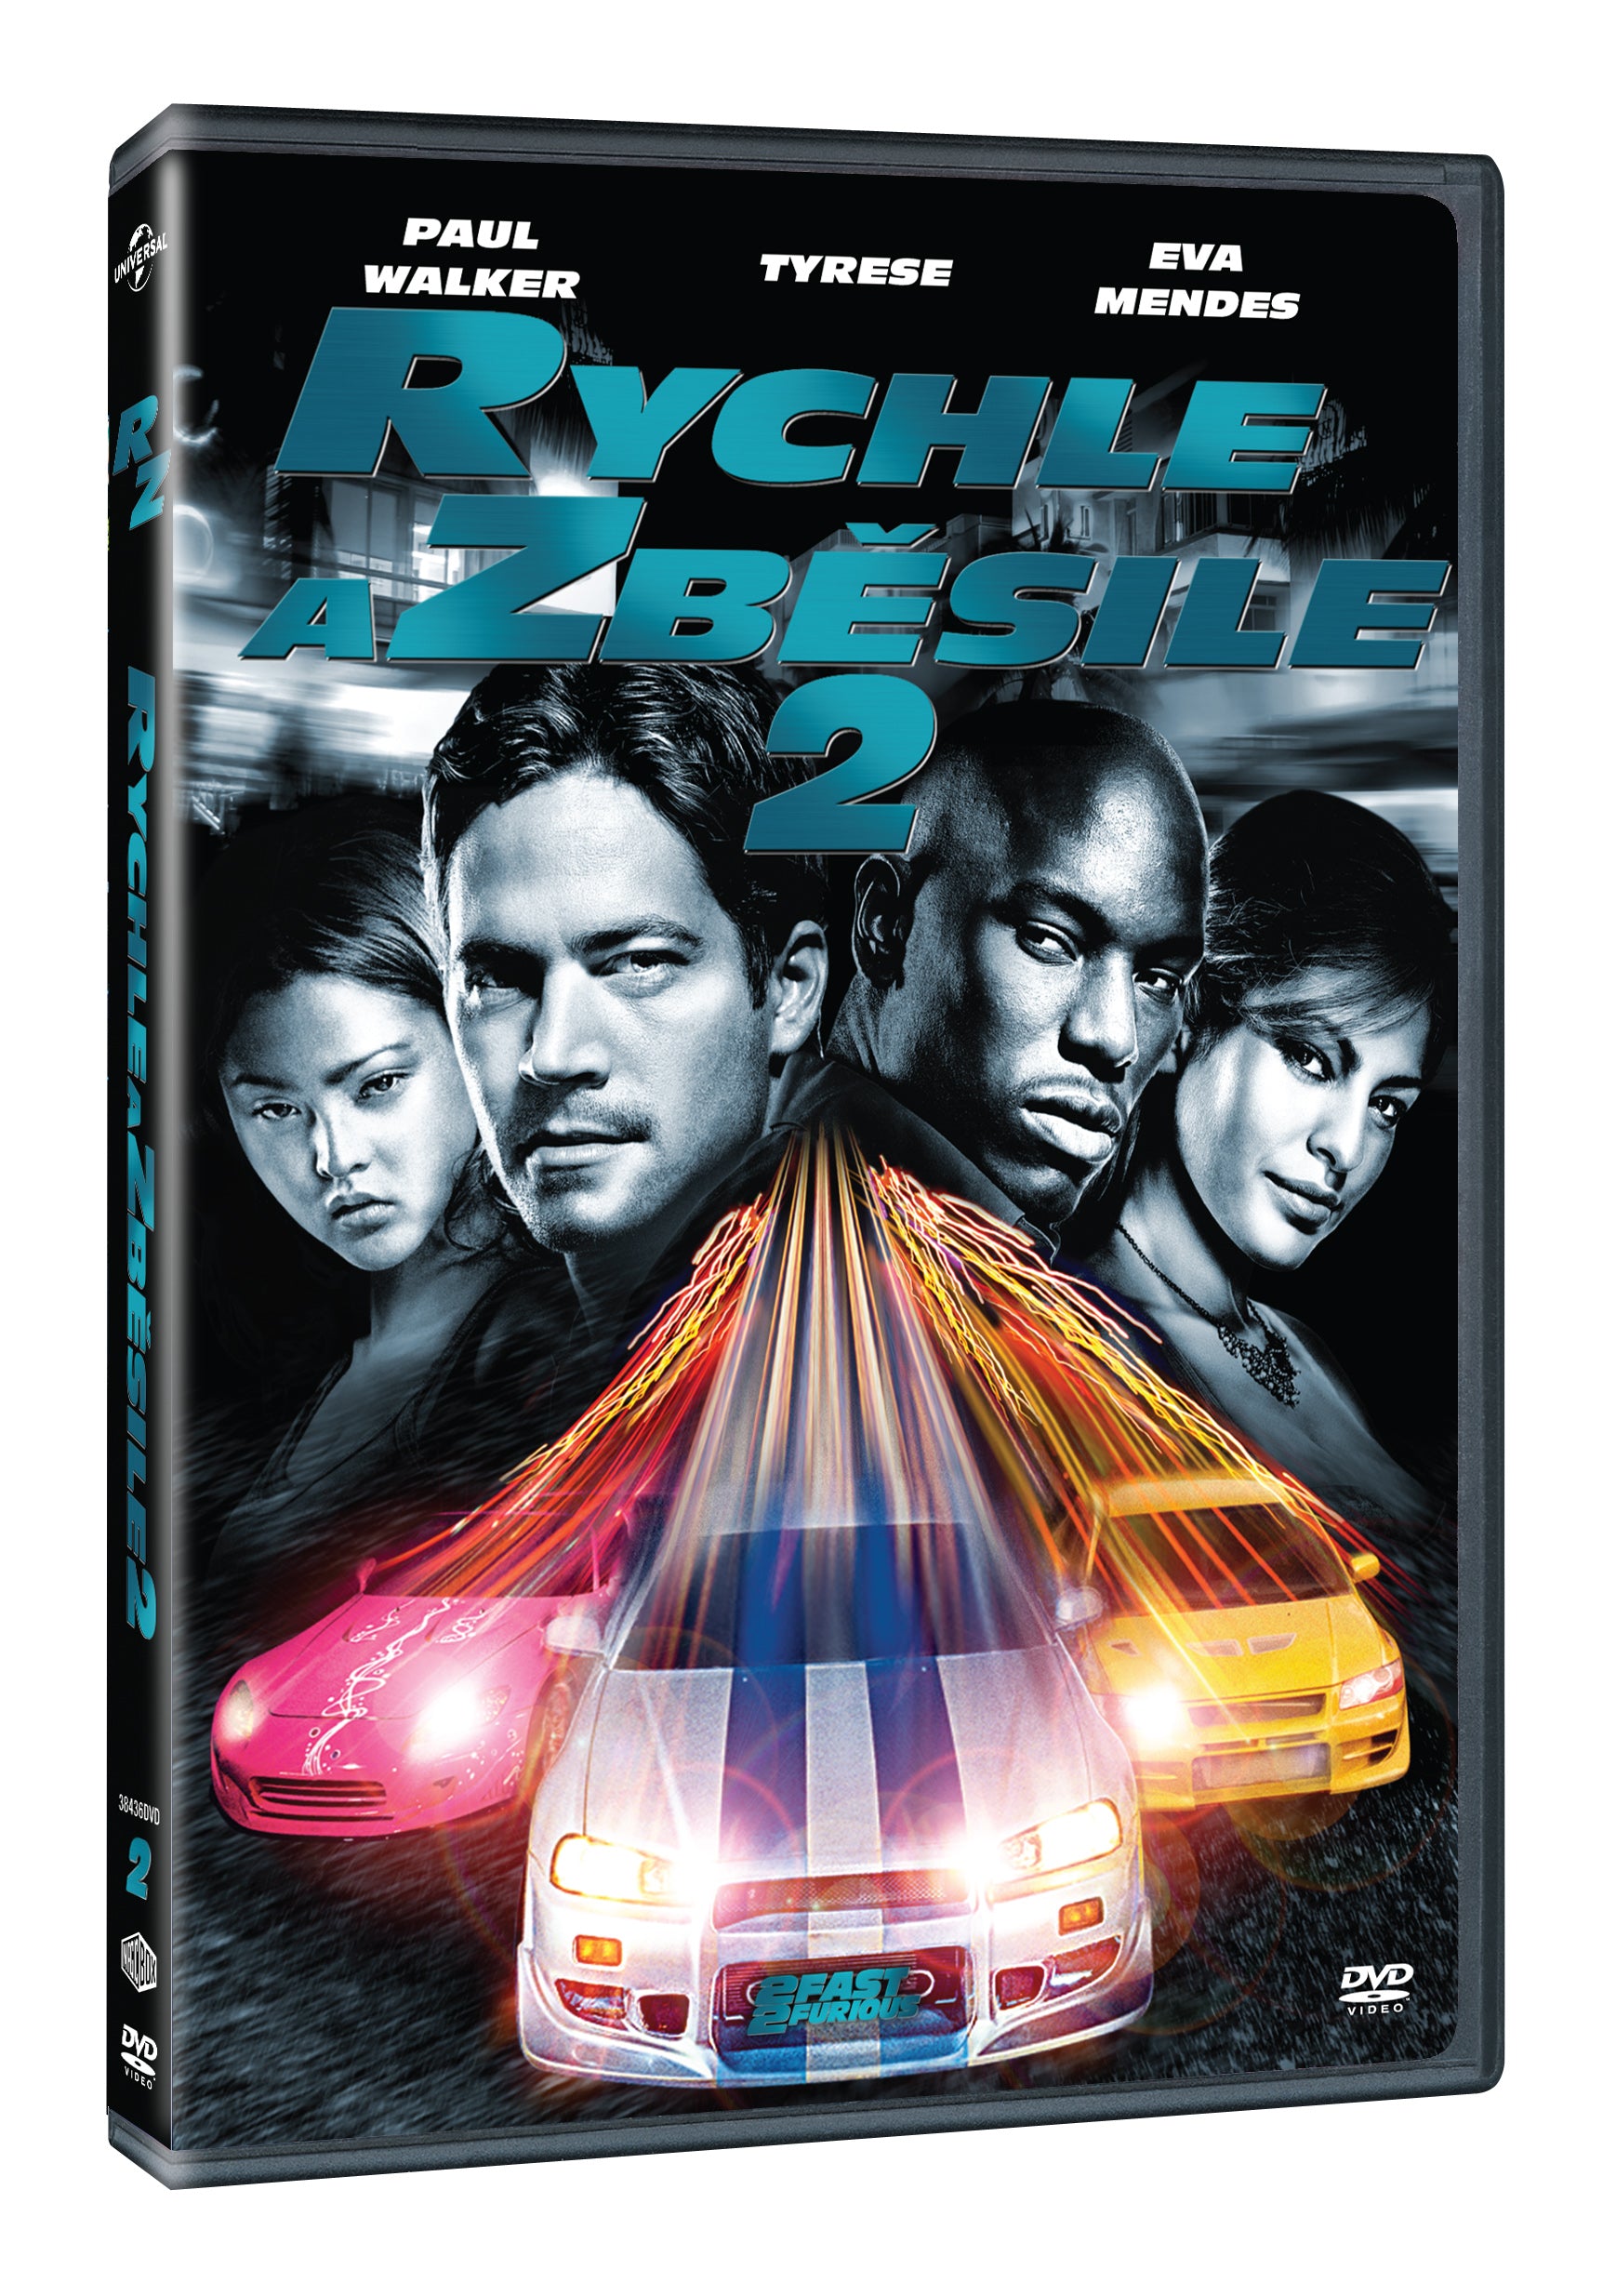 Rychle a zbesile 2 DVD / 2 Fast 2 Furious